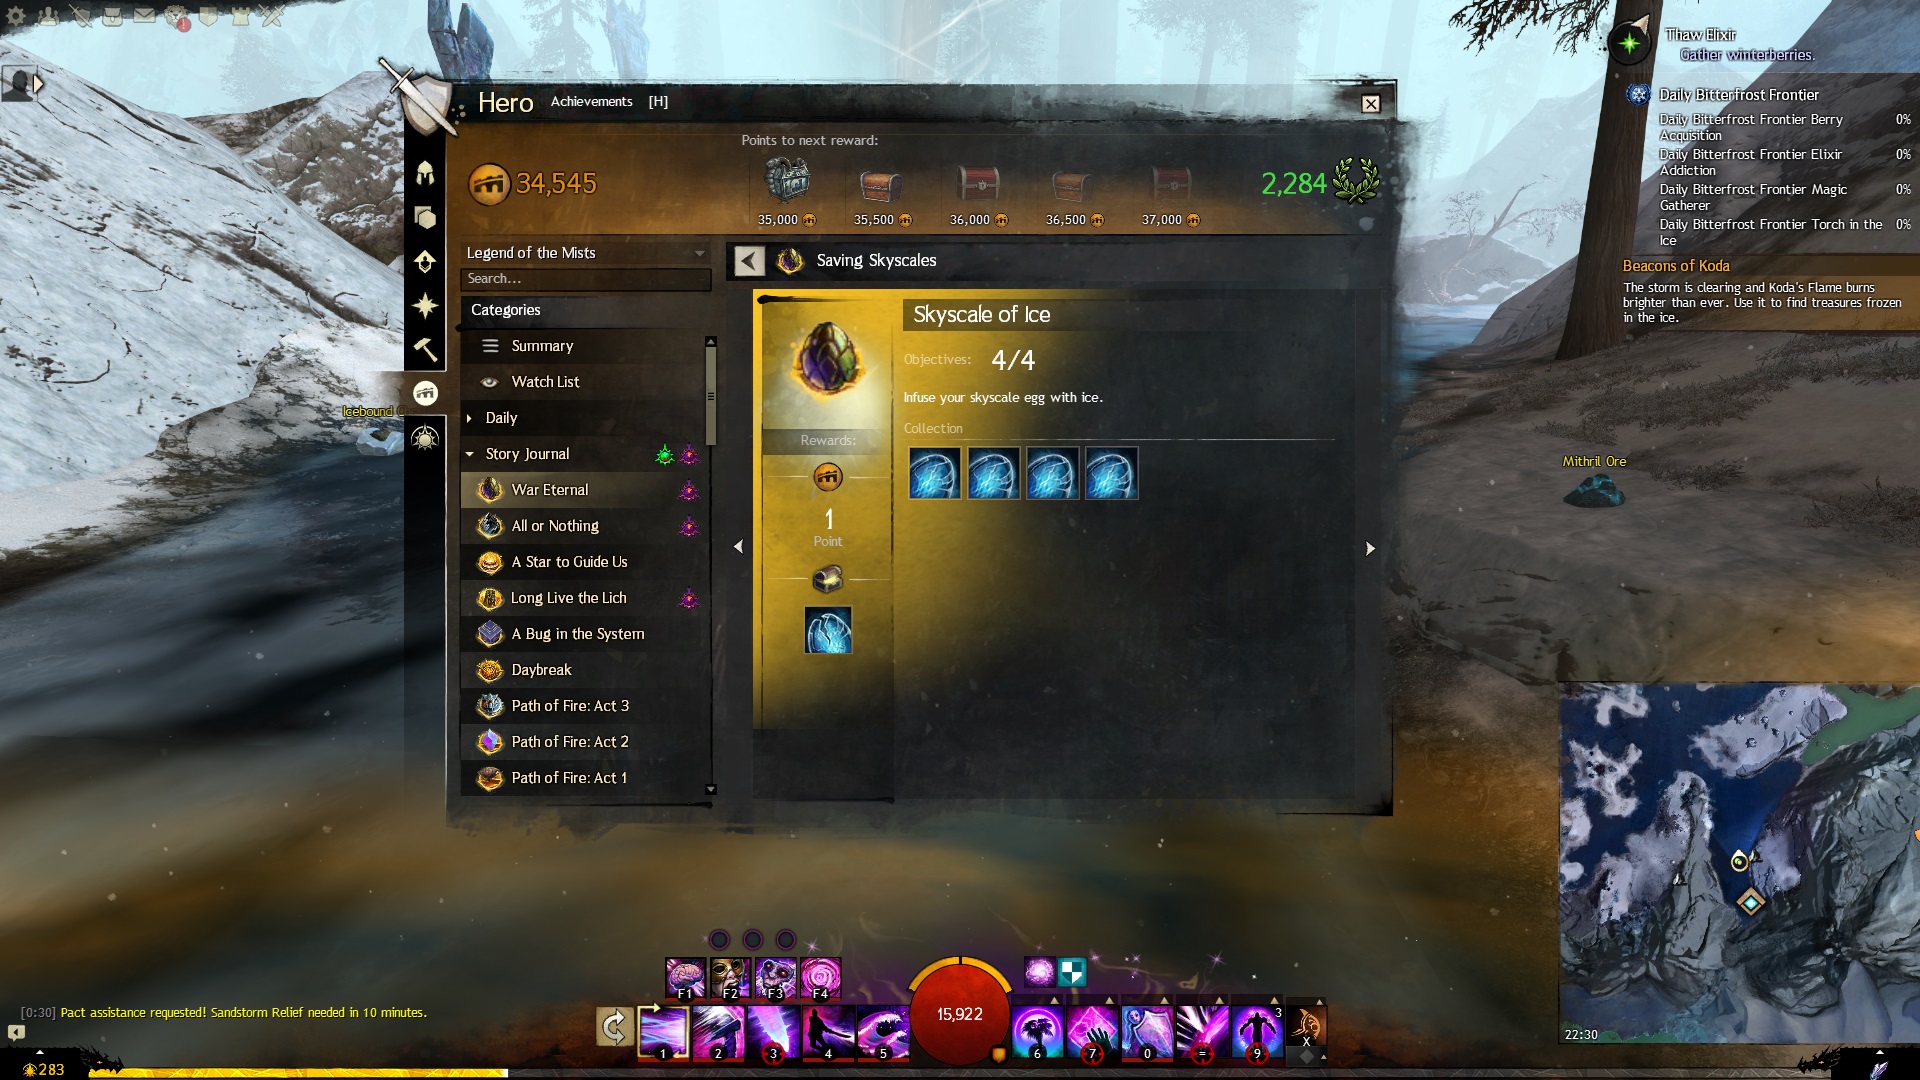 Eternal Ice Shards Guide for Guild Wars 2 - Where to get, Make Gold, 32  slot bags, Skyscale 